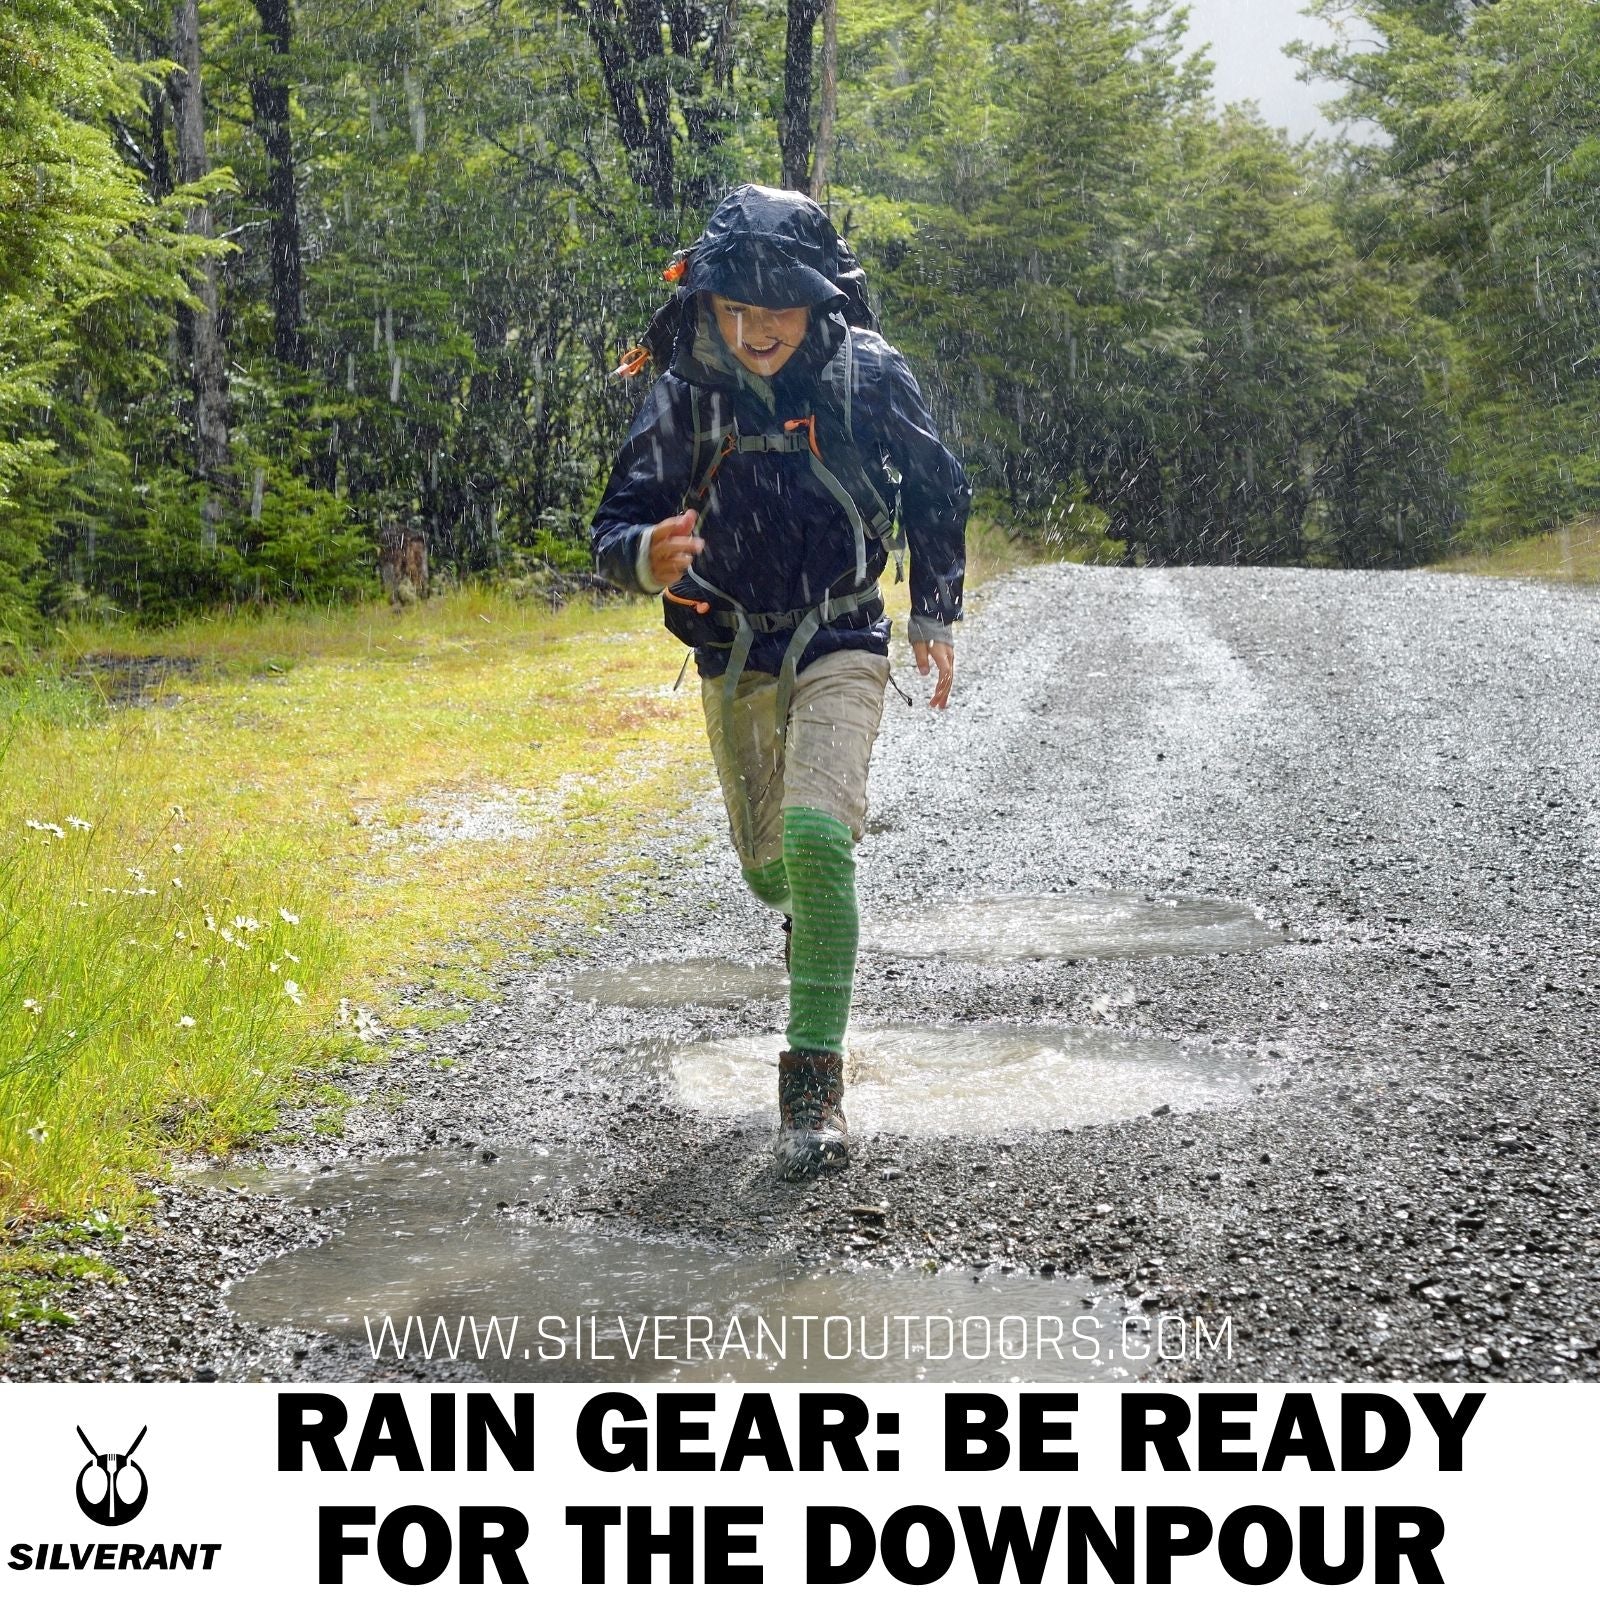 Rain Gear: Be Ready for the Downpour